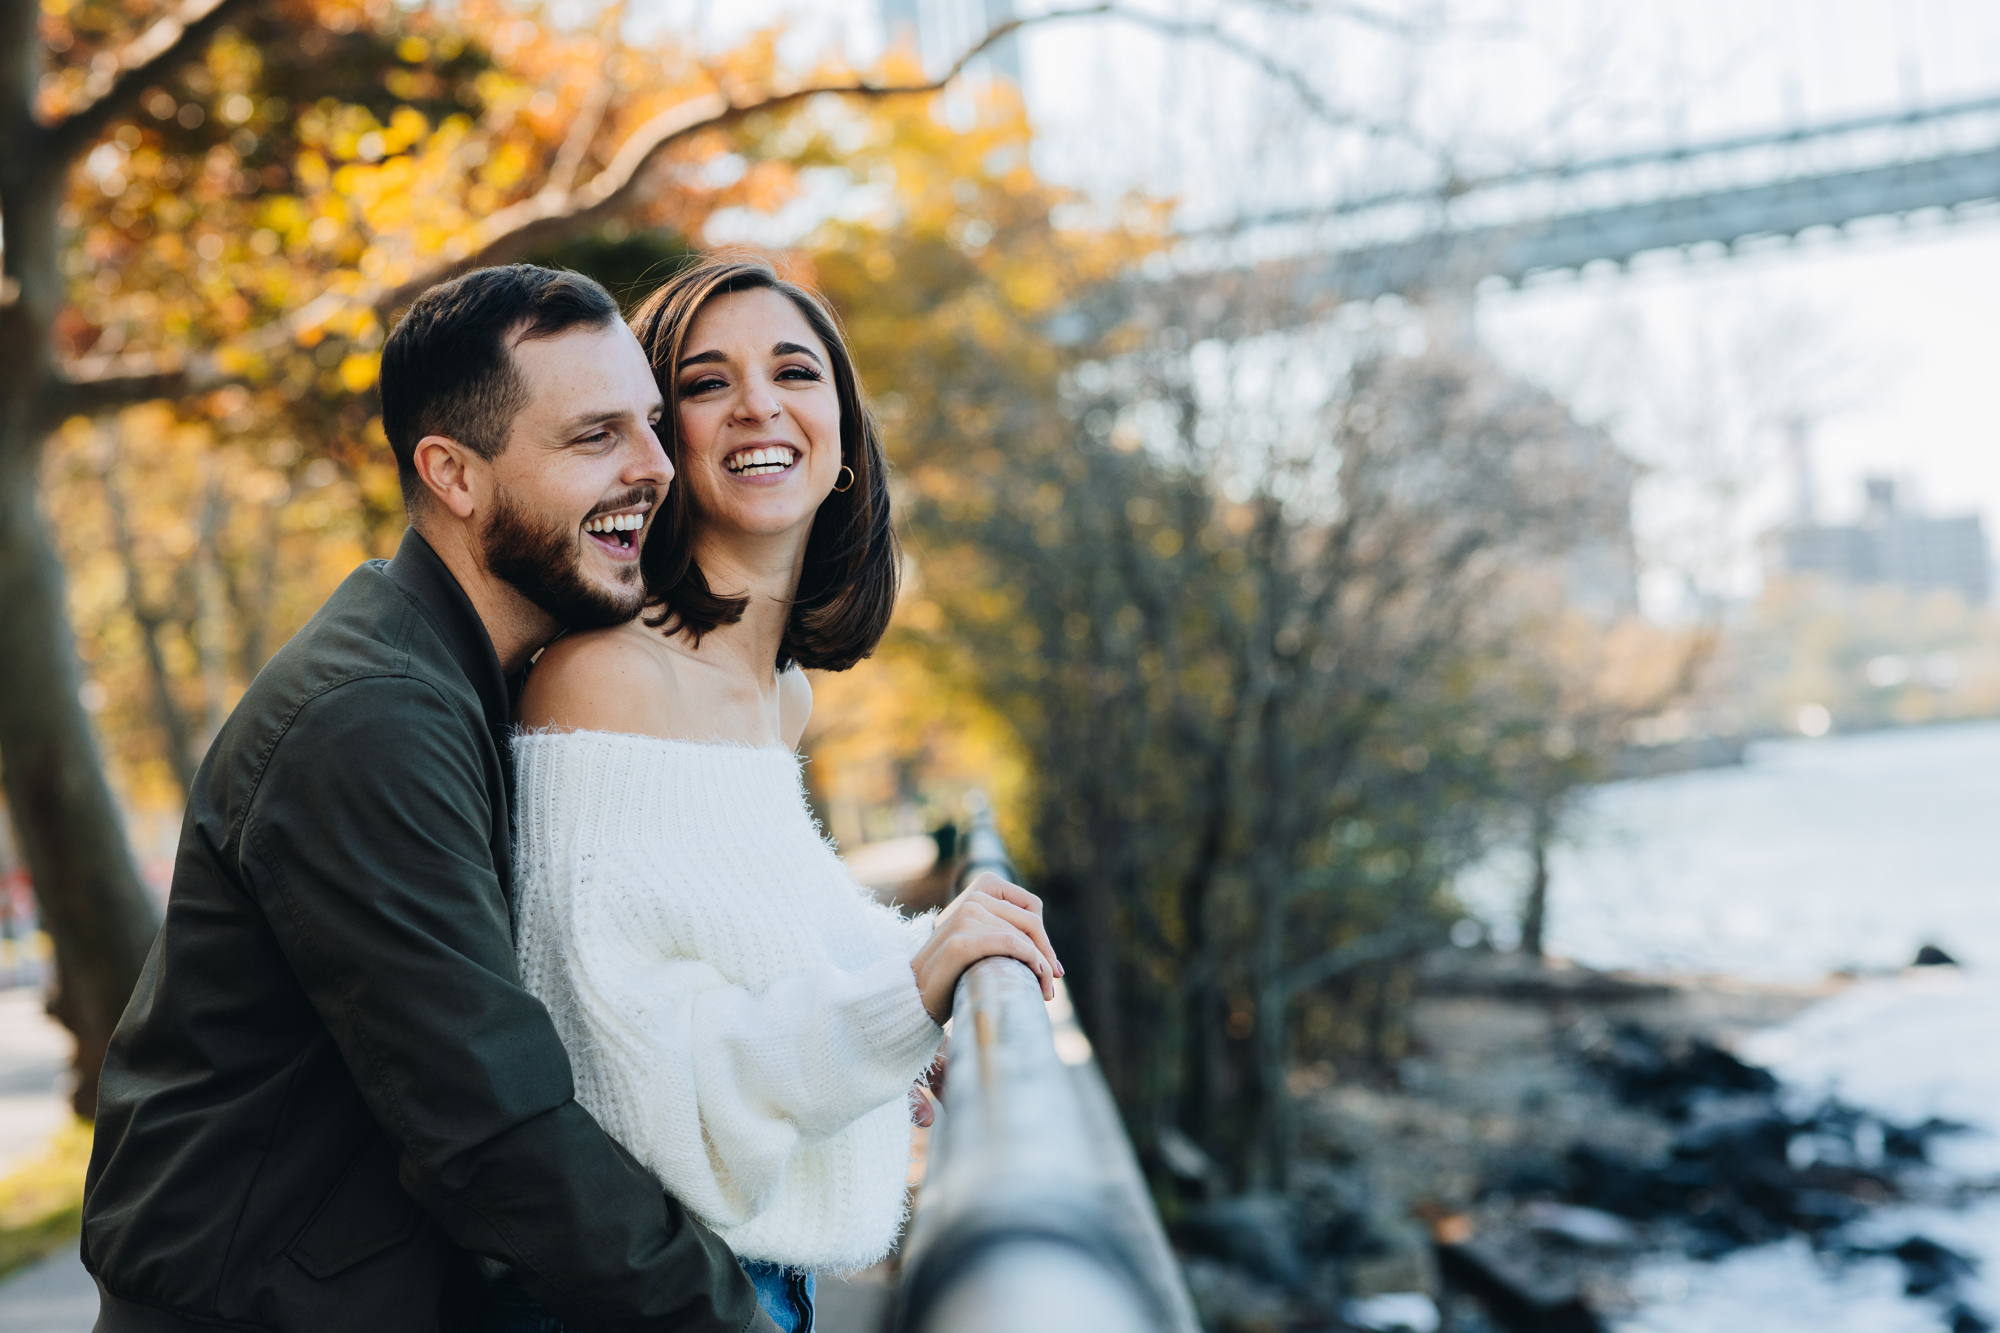 Charming Fall Engagement Photos in Astoria Park, Queens, New York